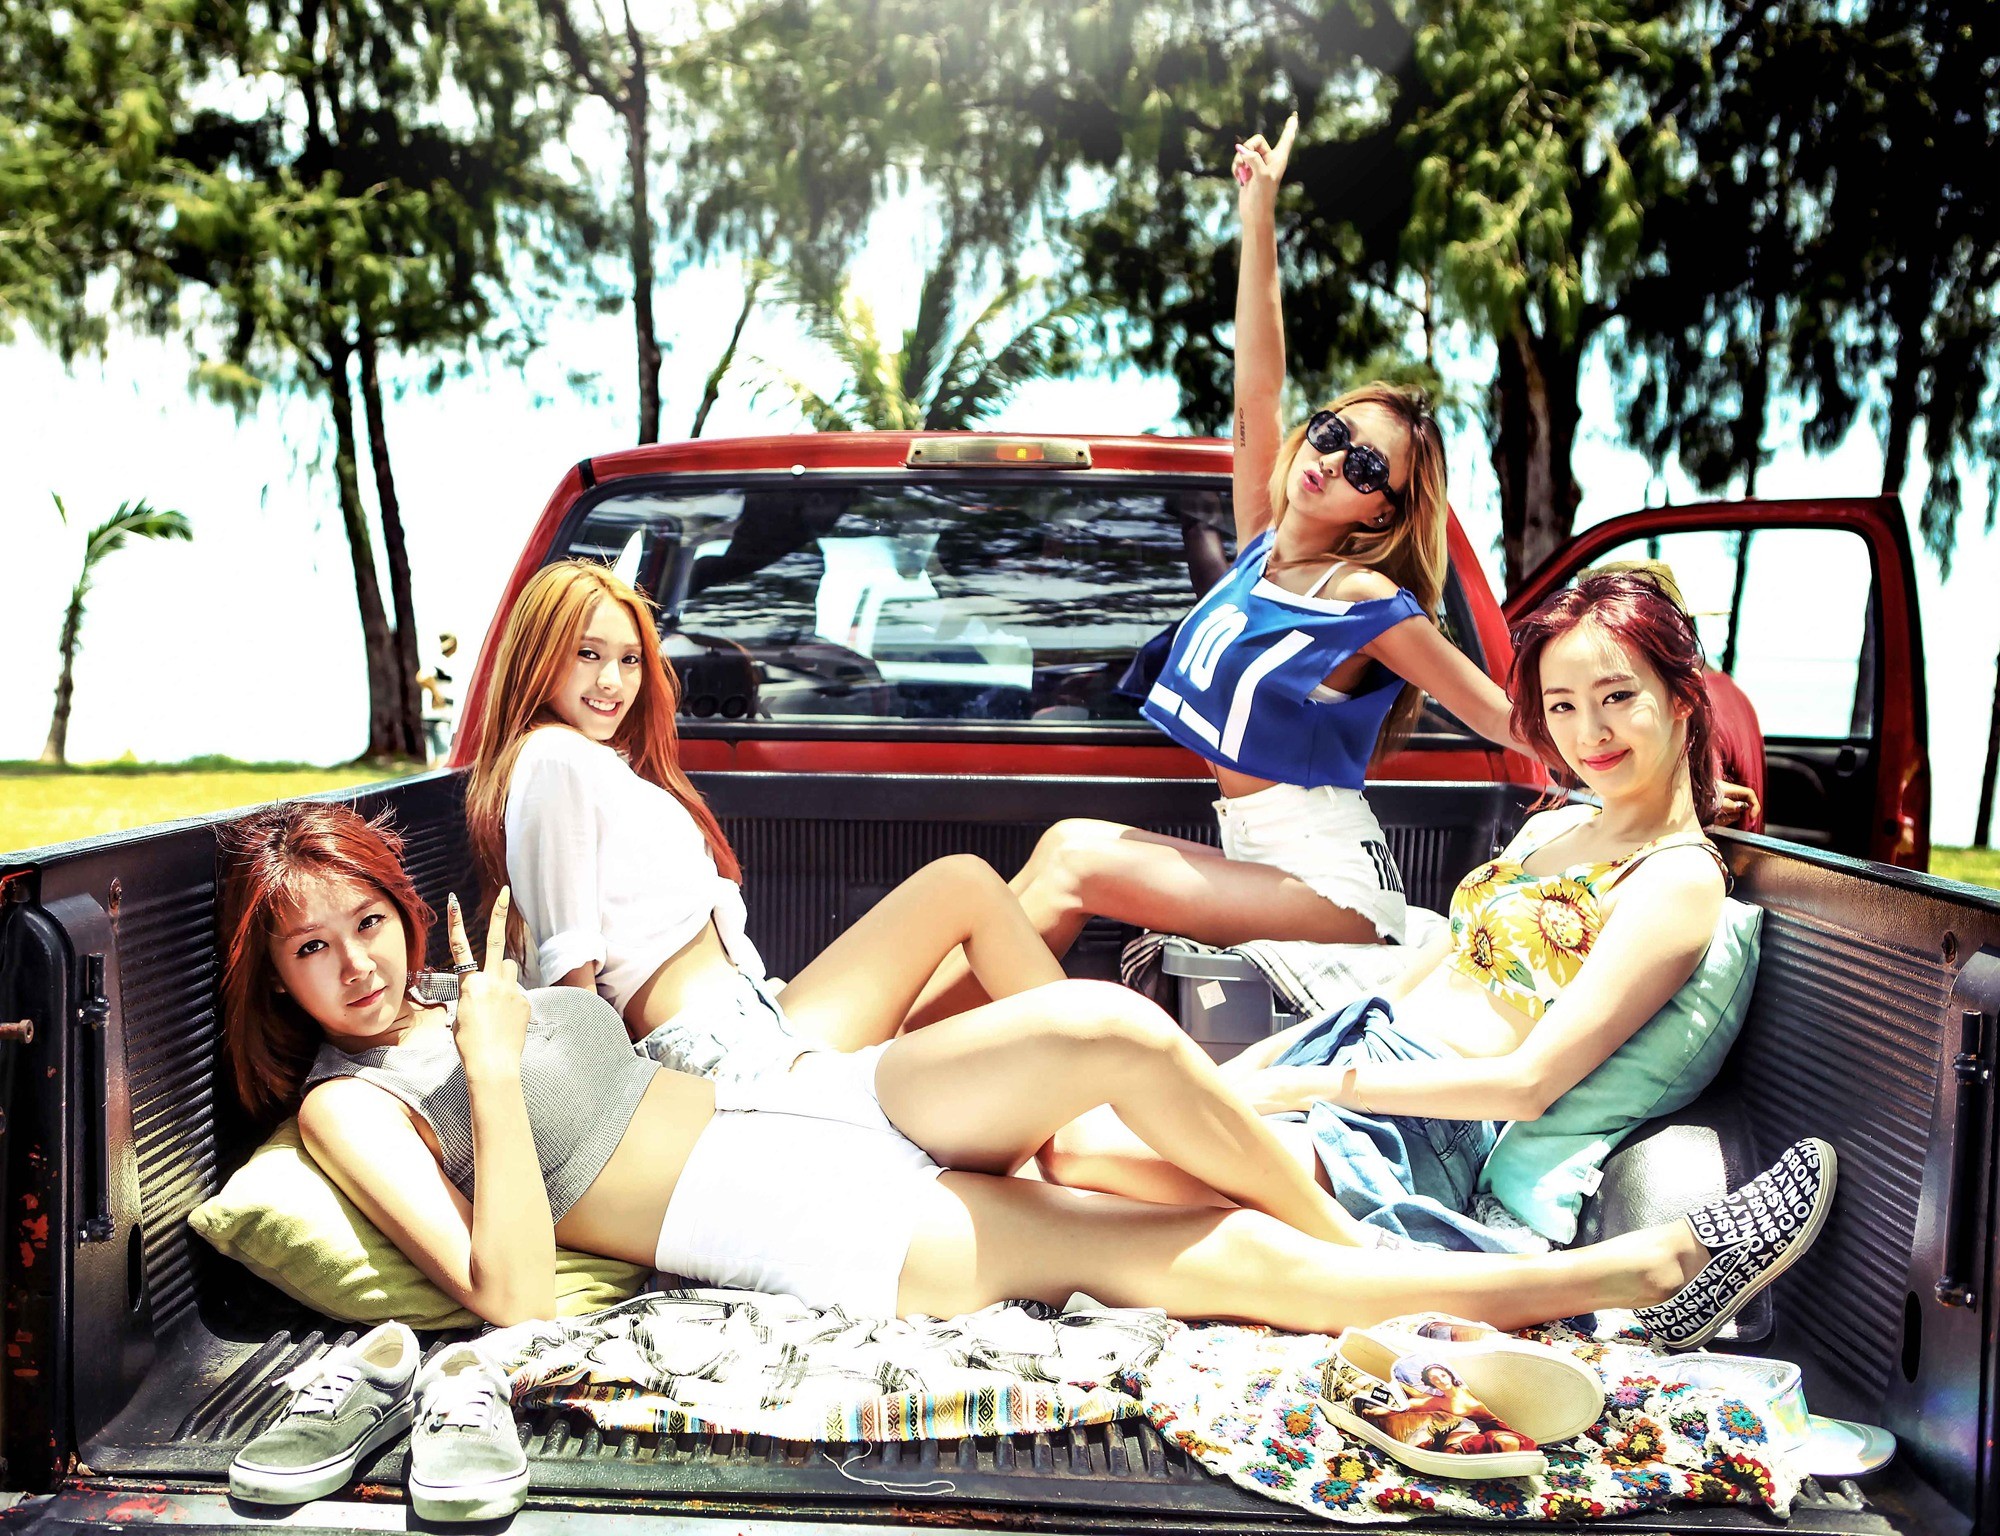 People 2000x1536 South Korea Asian women car group of women Sistar Korean women looking at viewer women with cars smiling women with shades sunglasses hand gesture vehicle red cars legs women outdoors